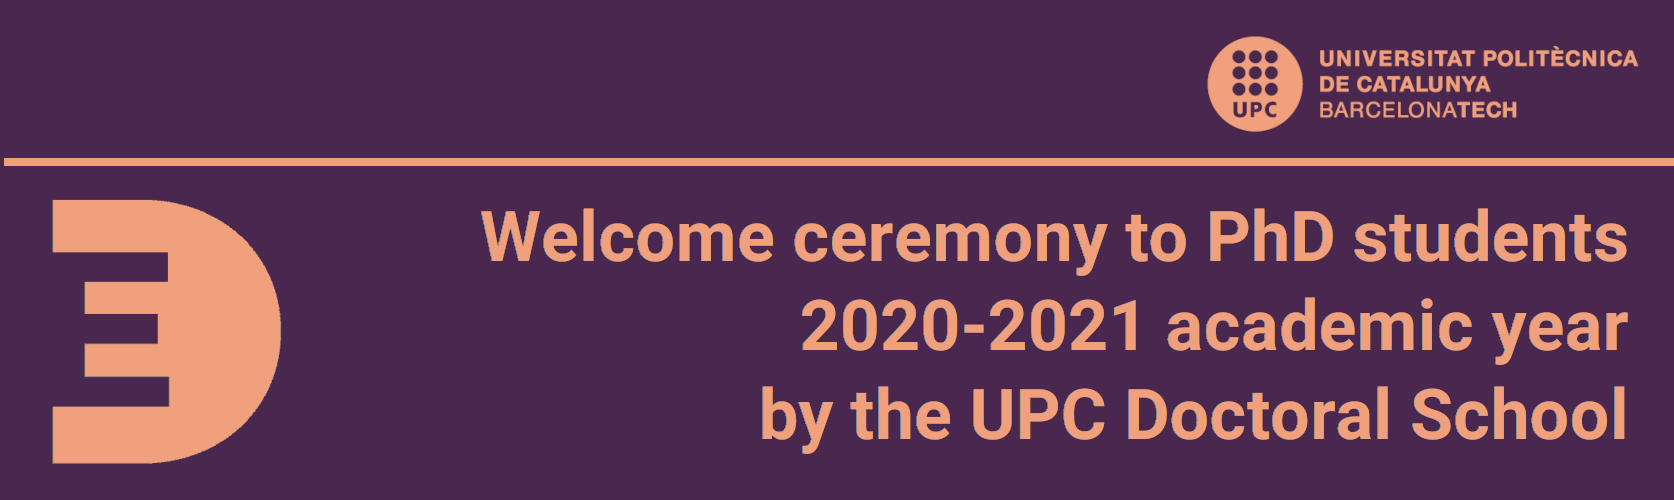 welcome_ceremony7.png